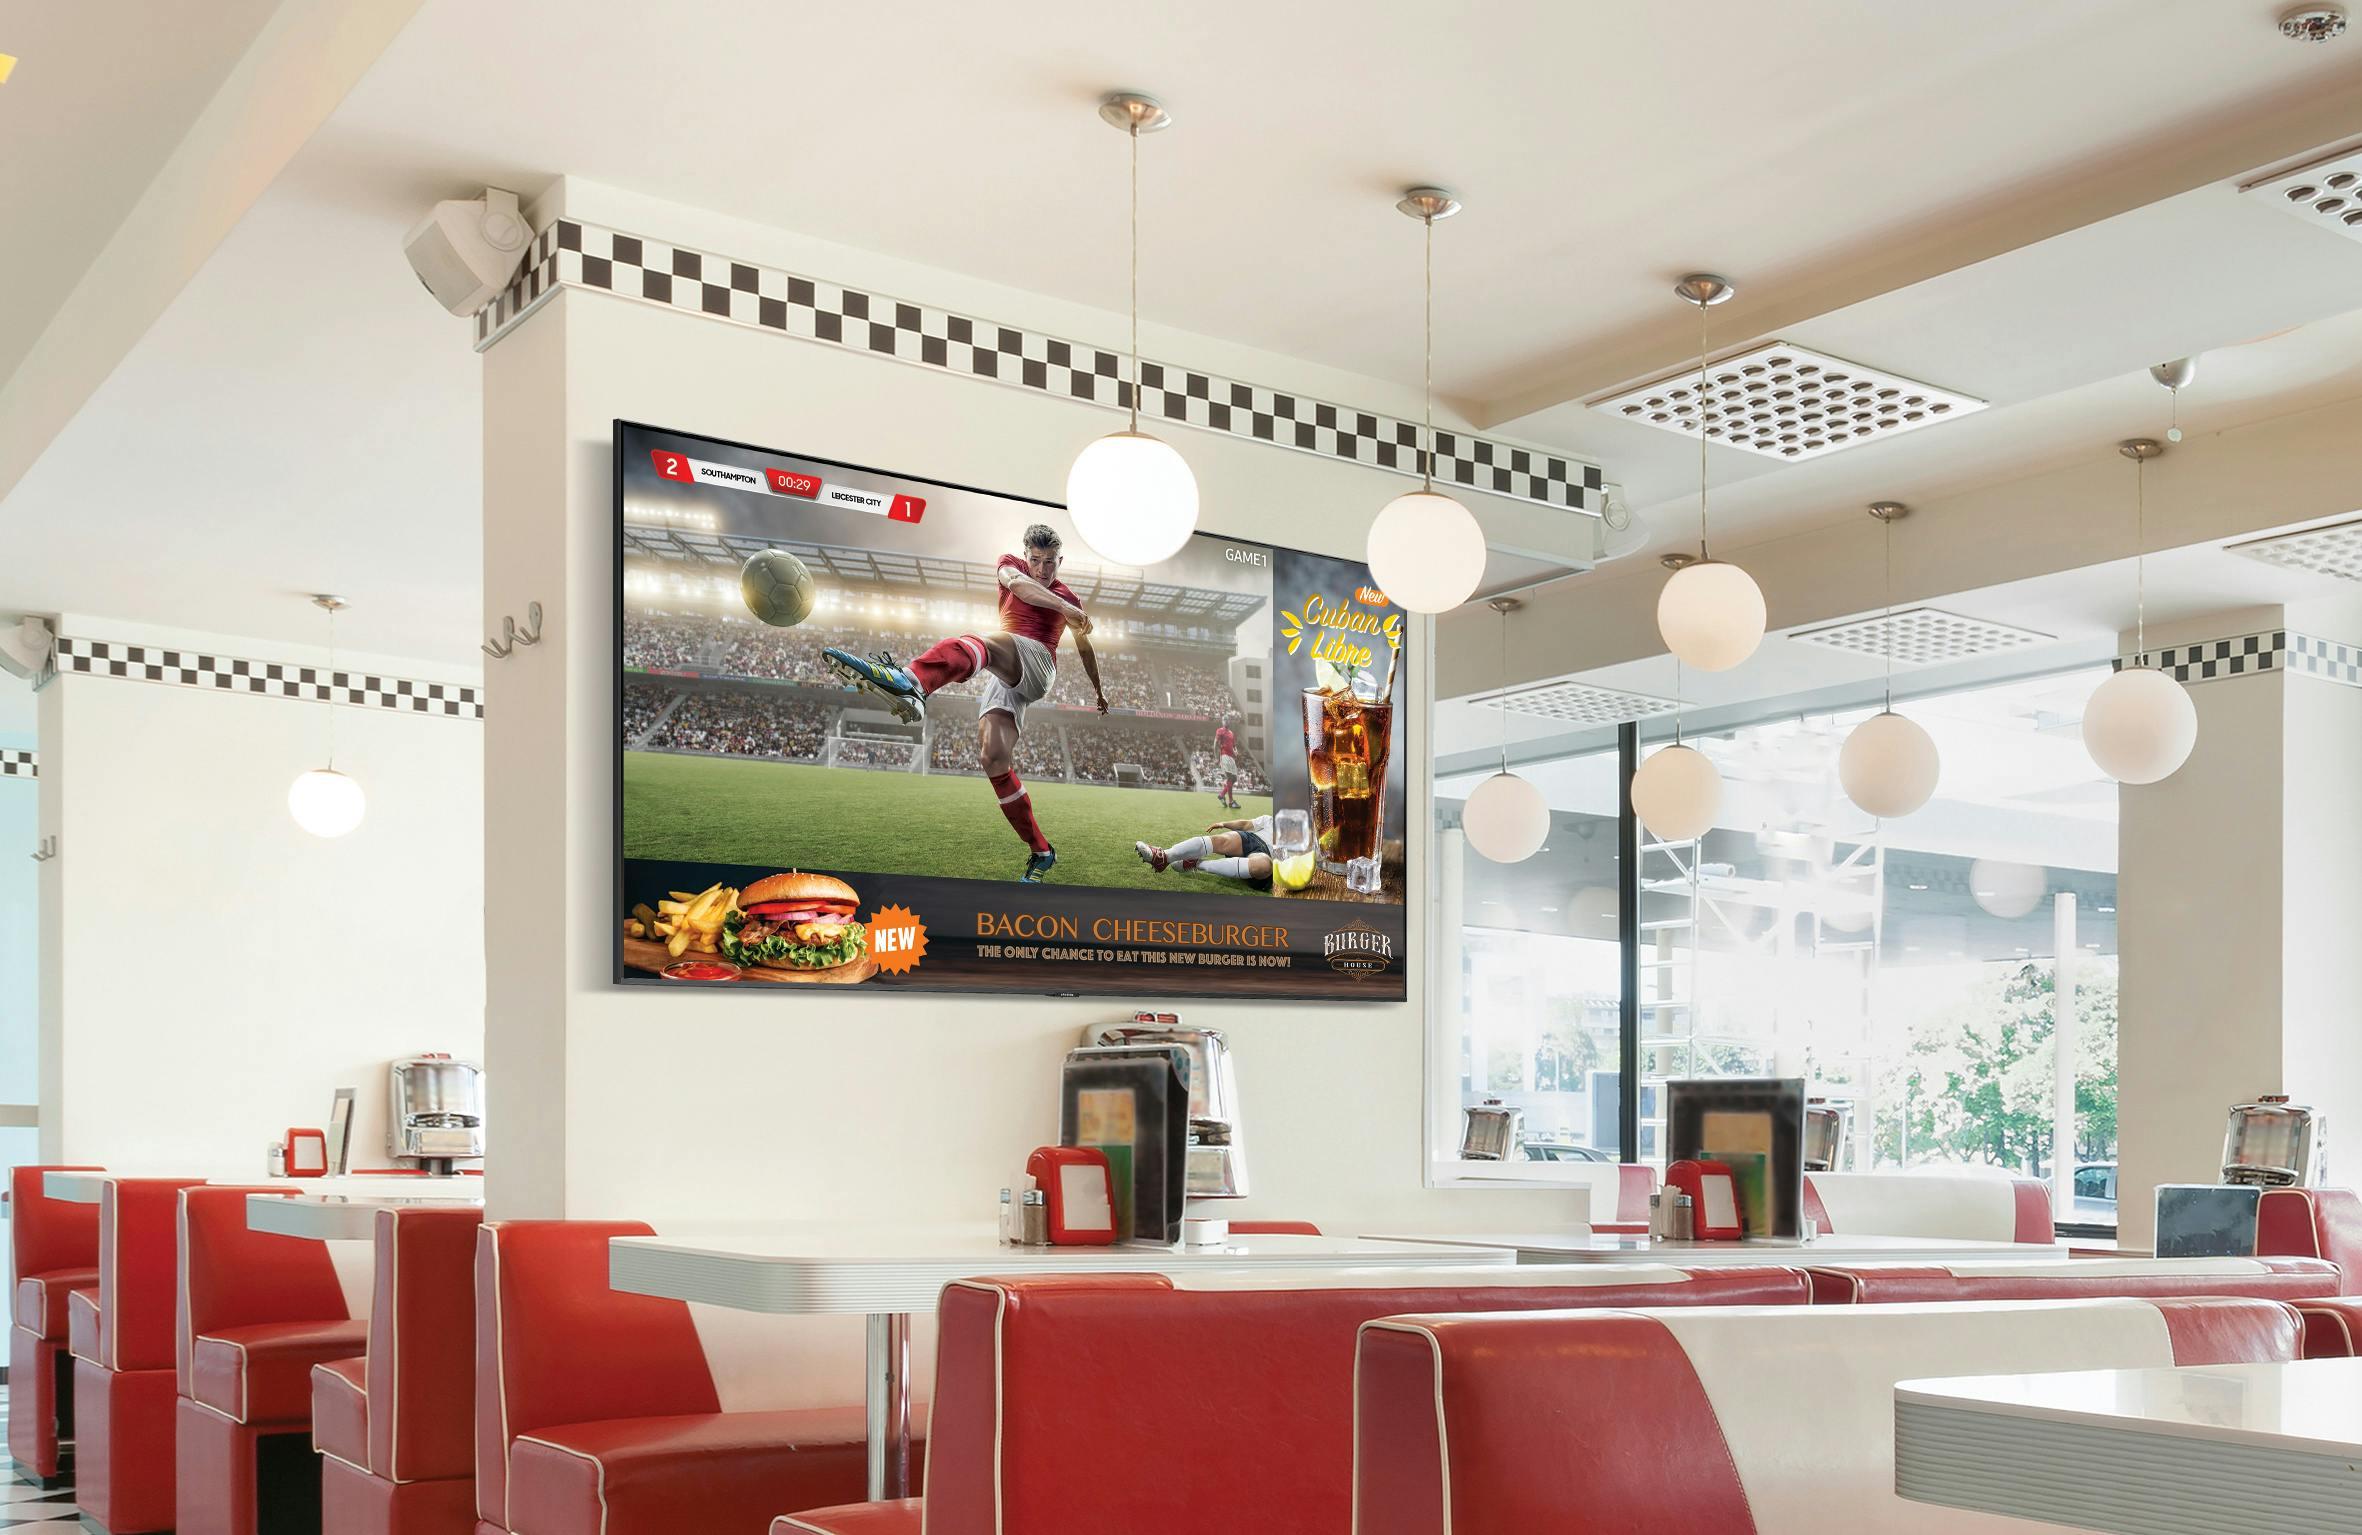 A soccer match is played on screen while restaurant specials appear on the bottom inside a fast-food restaurant